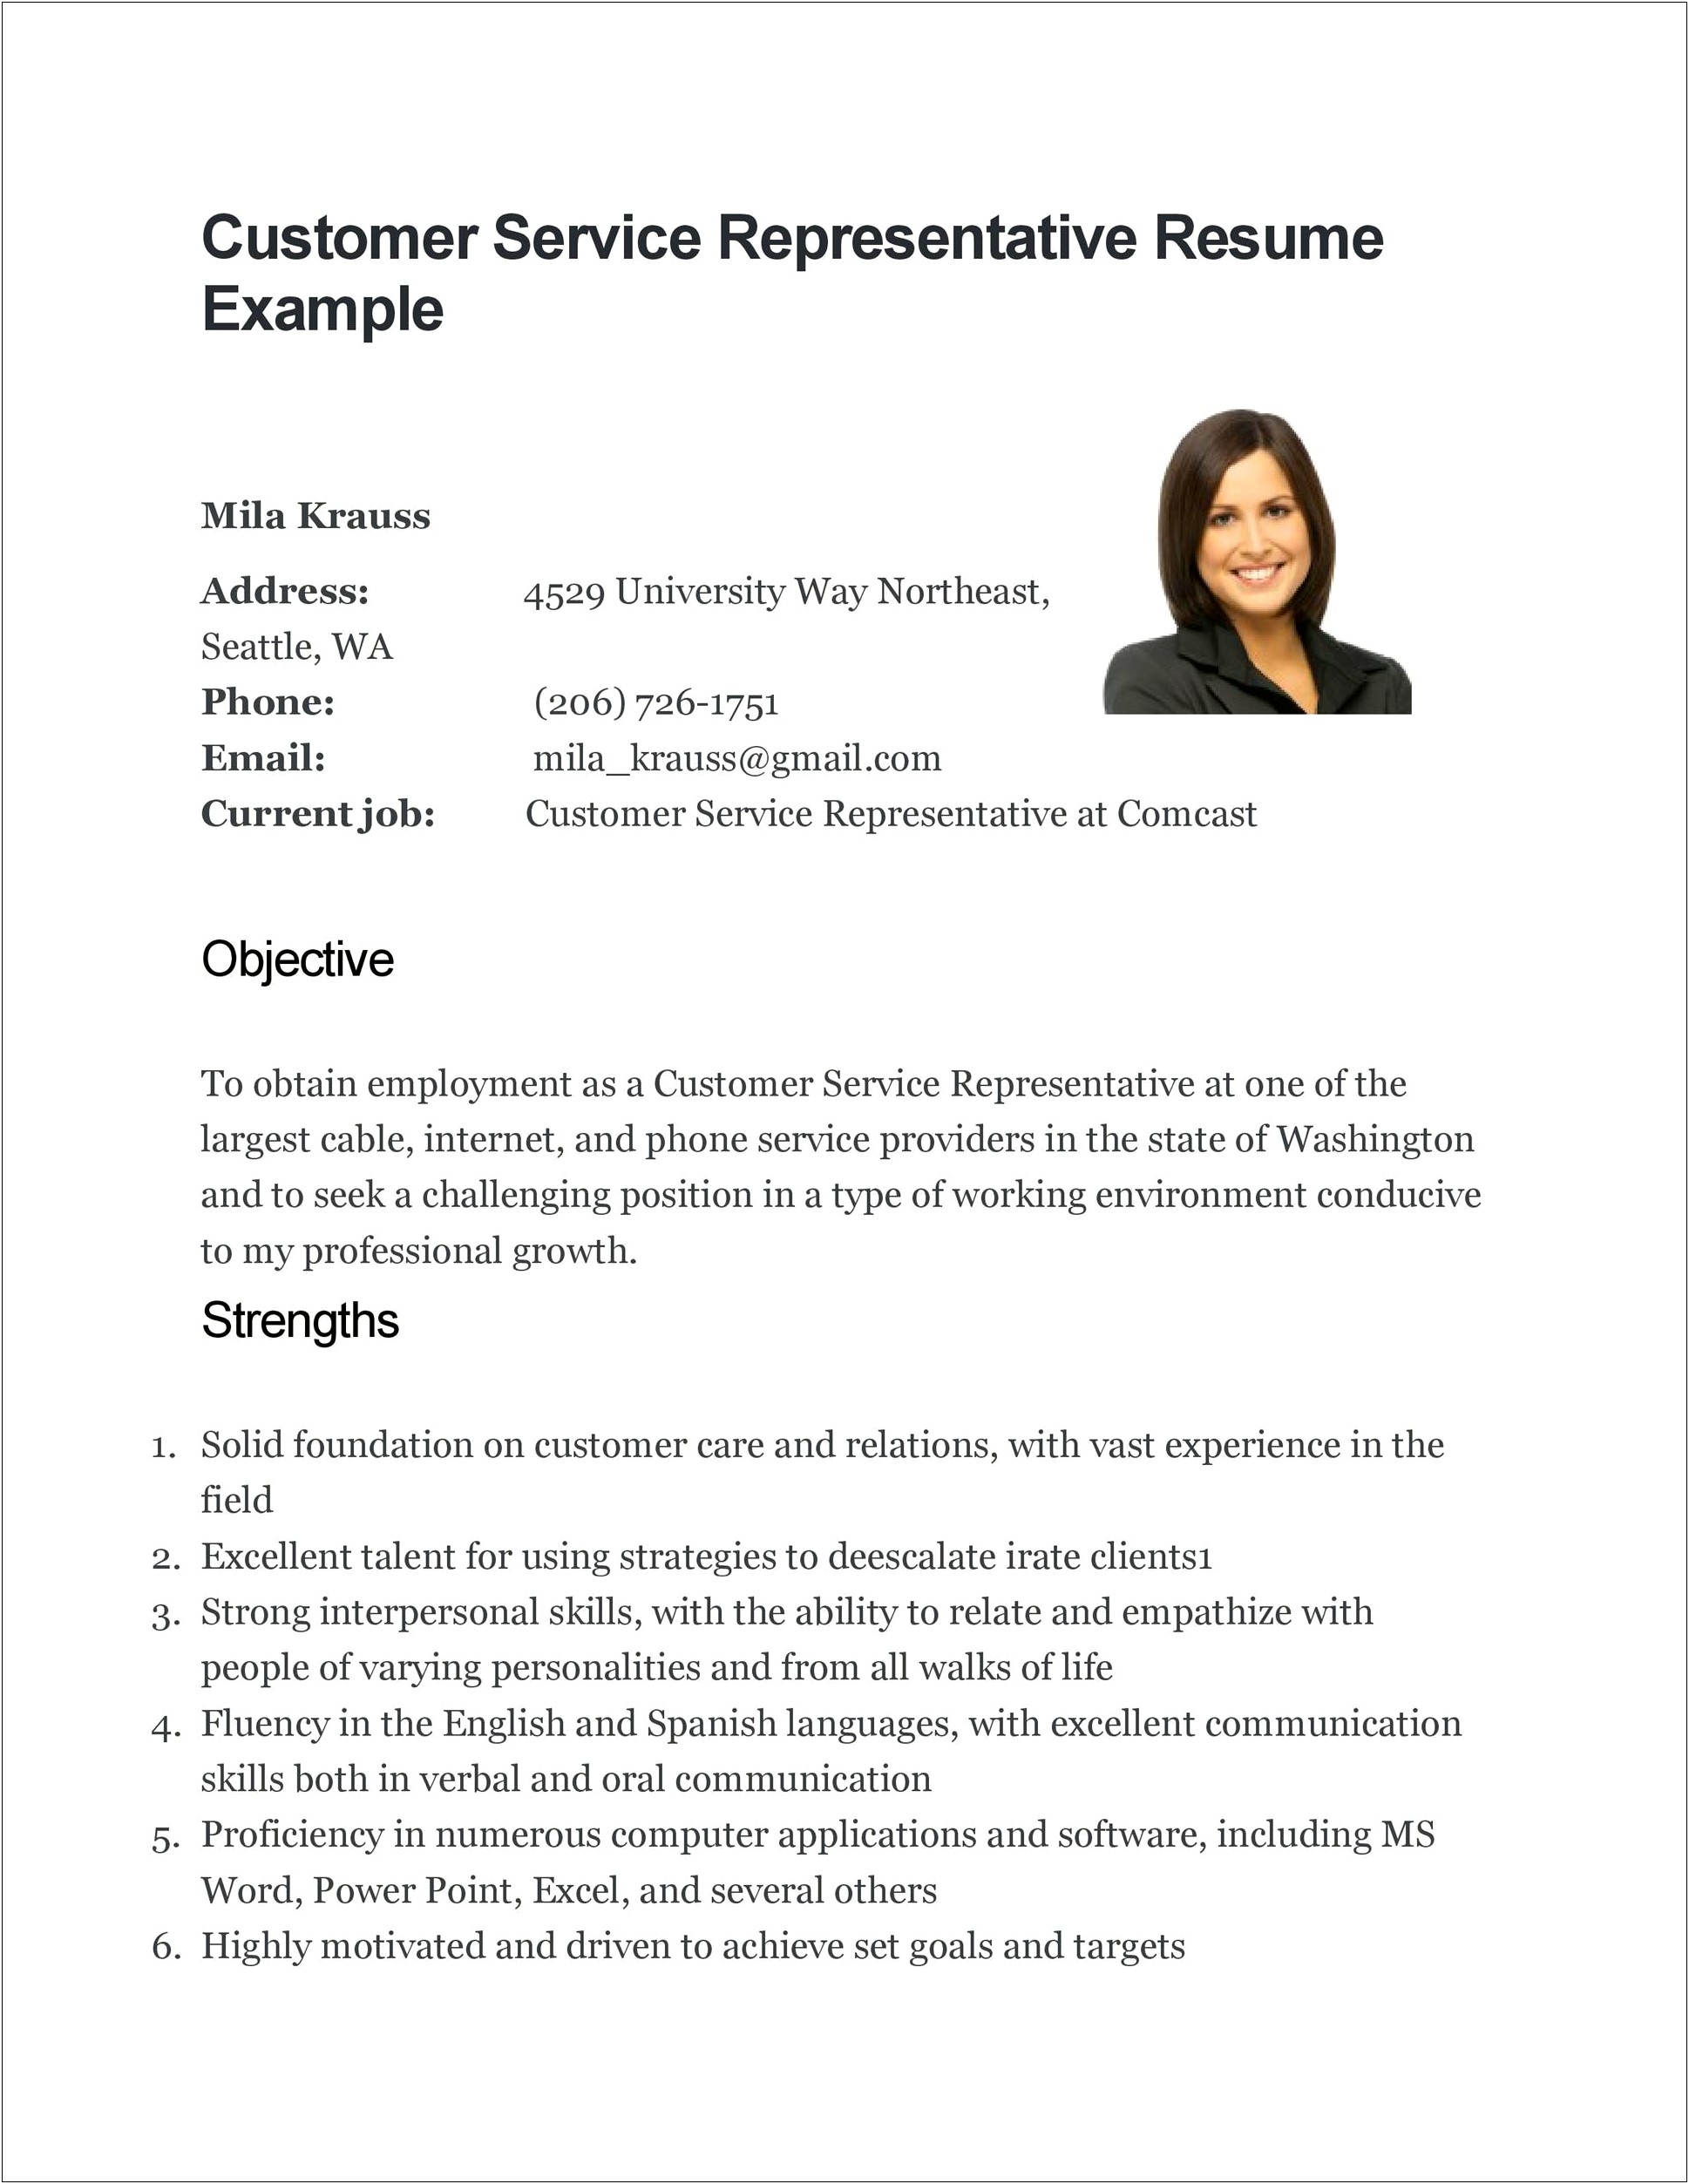 Resume Qualifications For Working In Customer Service